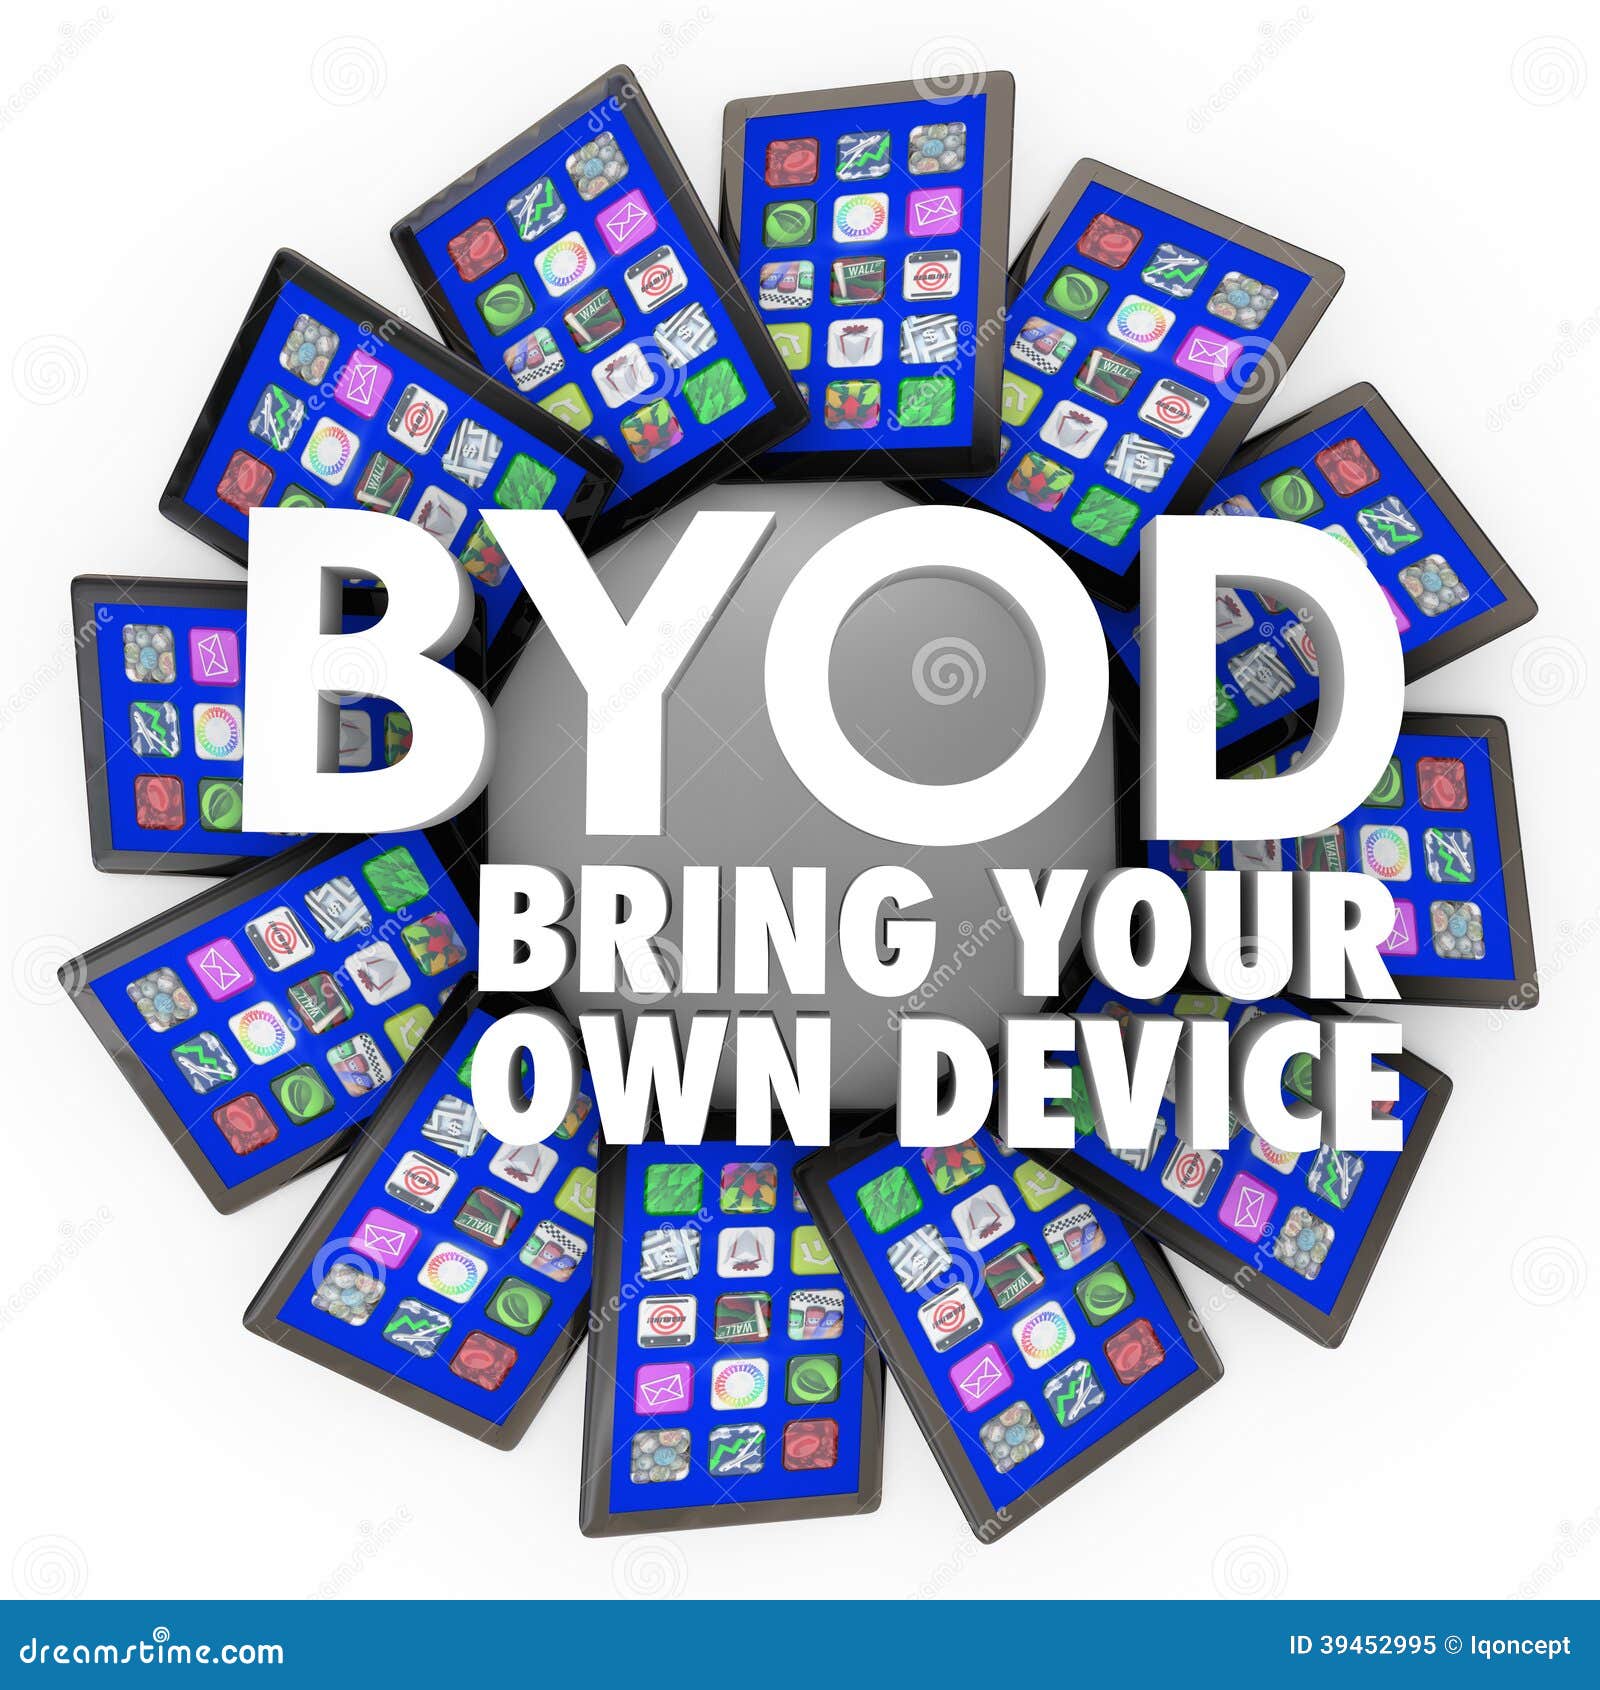 byod bring your own device tablets computers mobile work